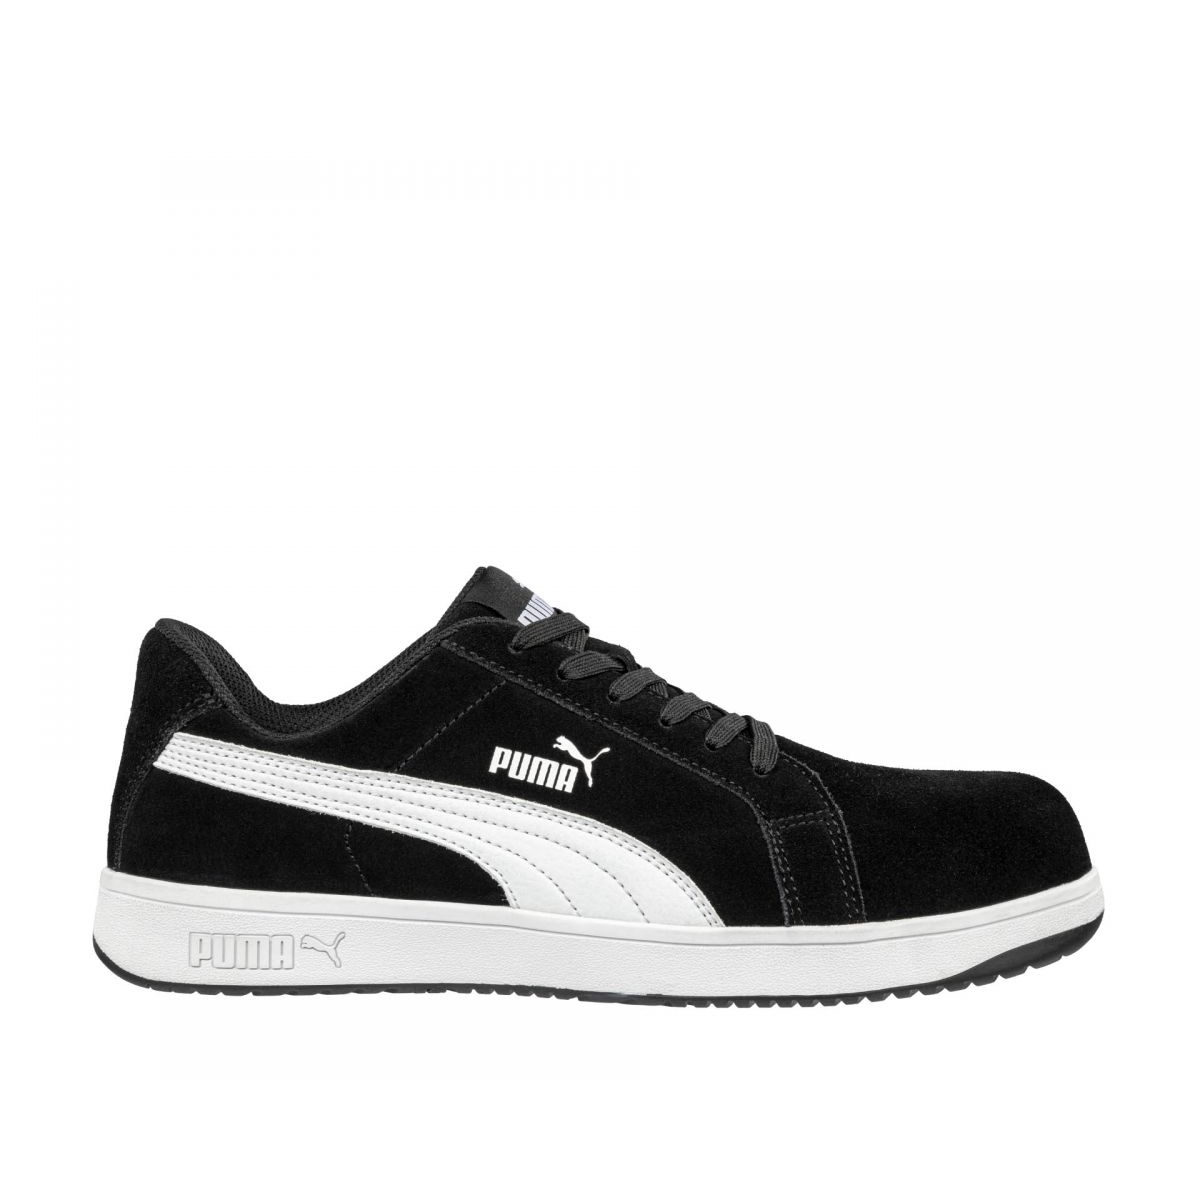 PUMA Safety Men's Iconic Low Composite Toe EH Work Shoes Black Suede - 640015 ONE SIZE BLACK - BLACK, 14